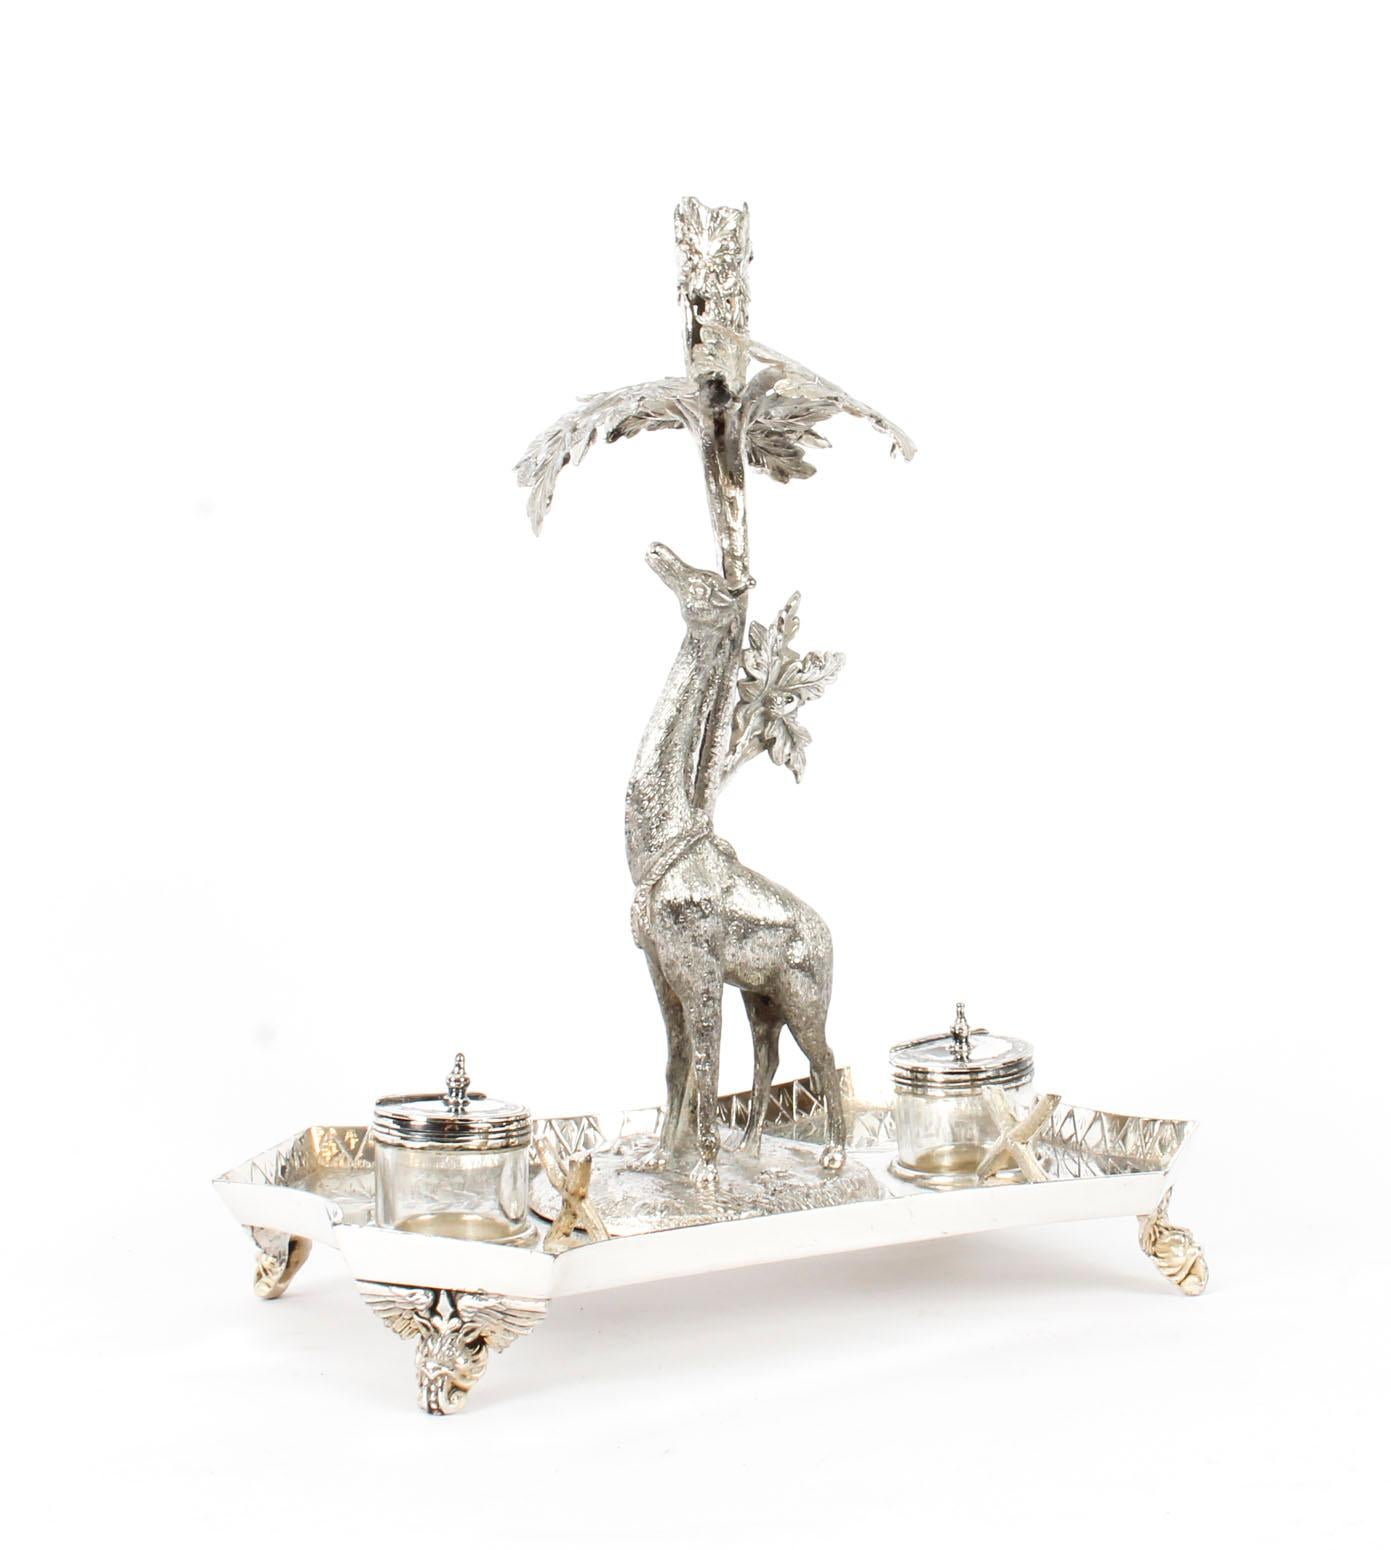 This is a magnificent novelty silver plated desk set, circa 1880 in date.

The desk set bears the mark of James Deakin & Sons, Sheffield.
 
The desk set comprises of an unusually shaped tray which stands on four attractive figural birds feet.